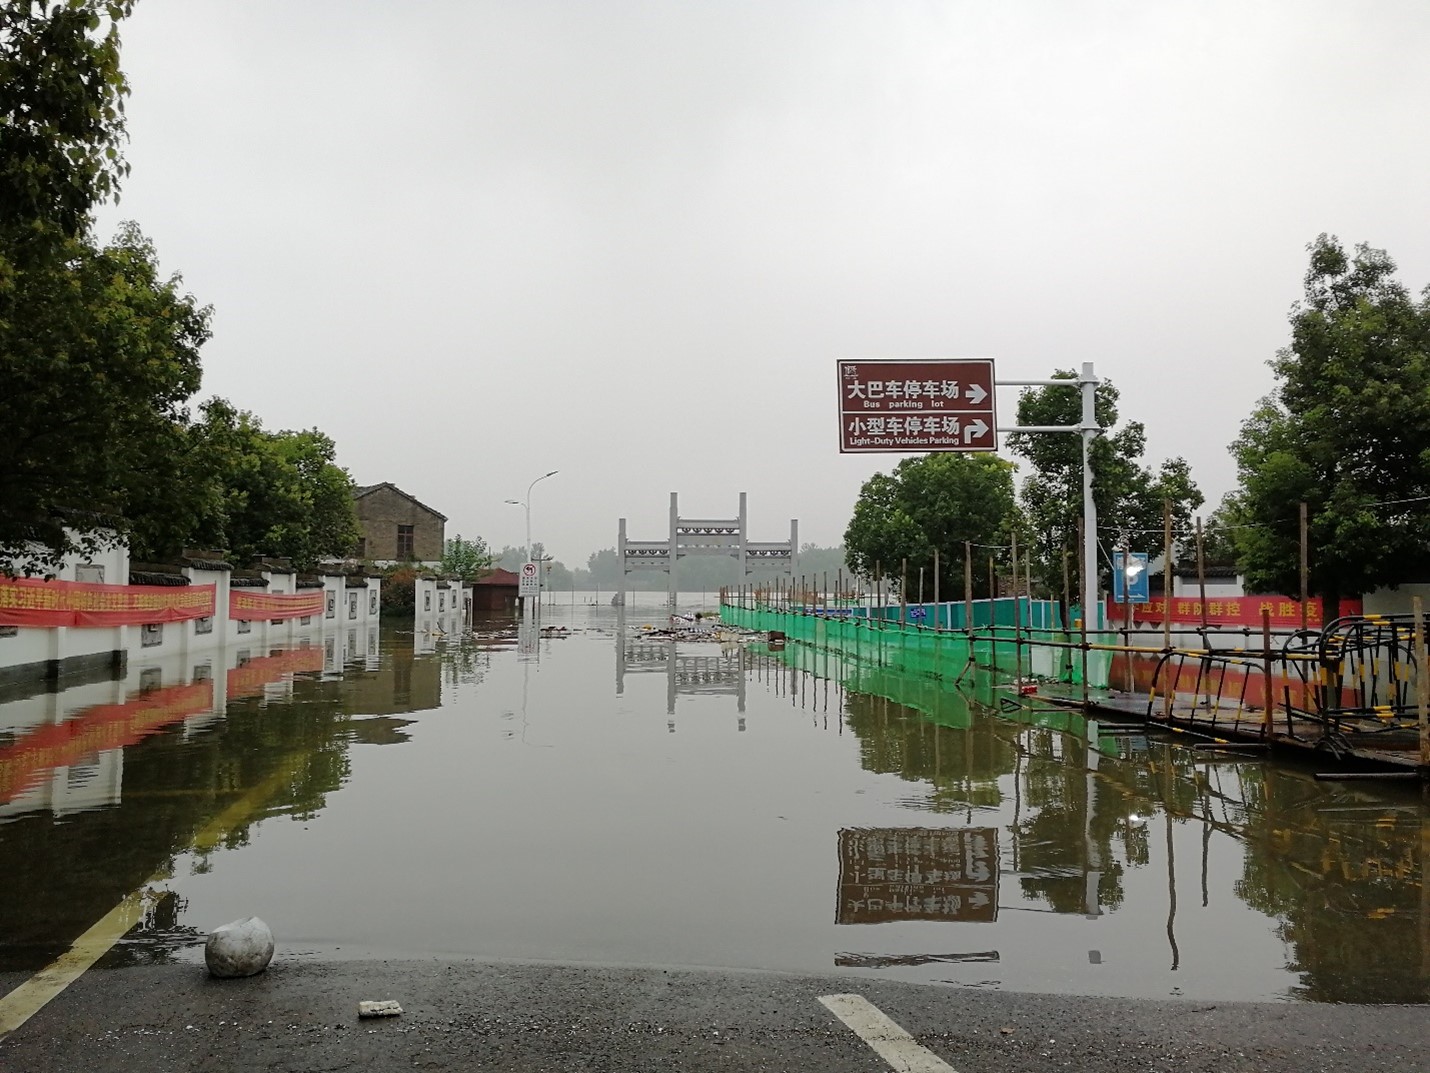 Photograph of a large road in China covered with floodwater